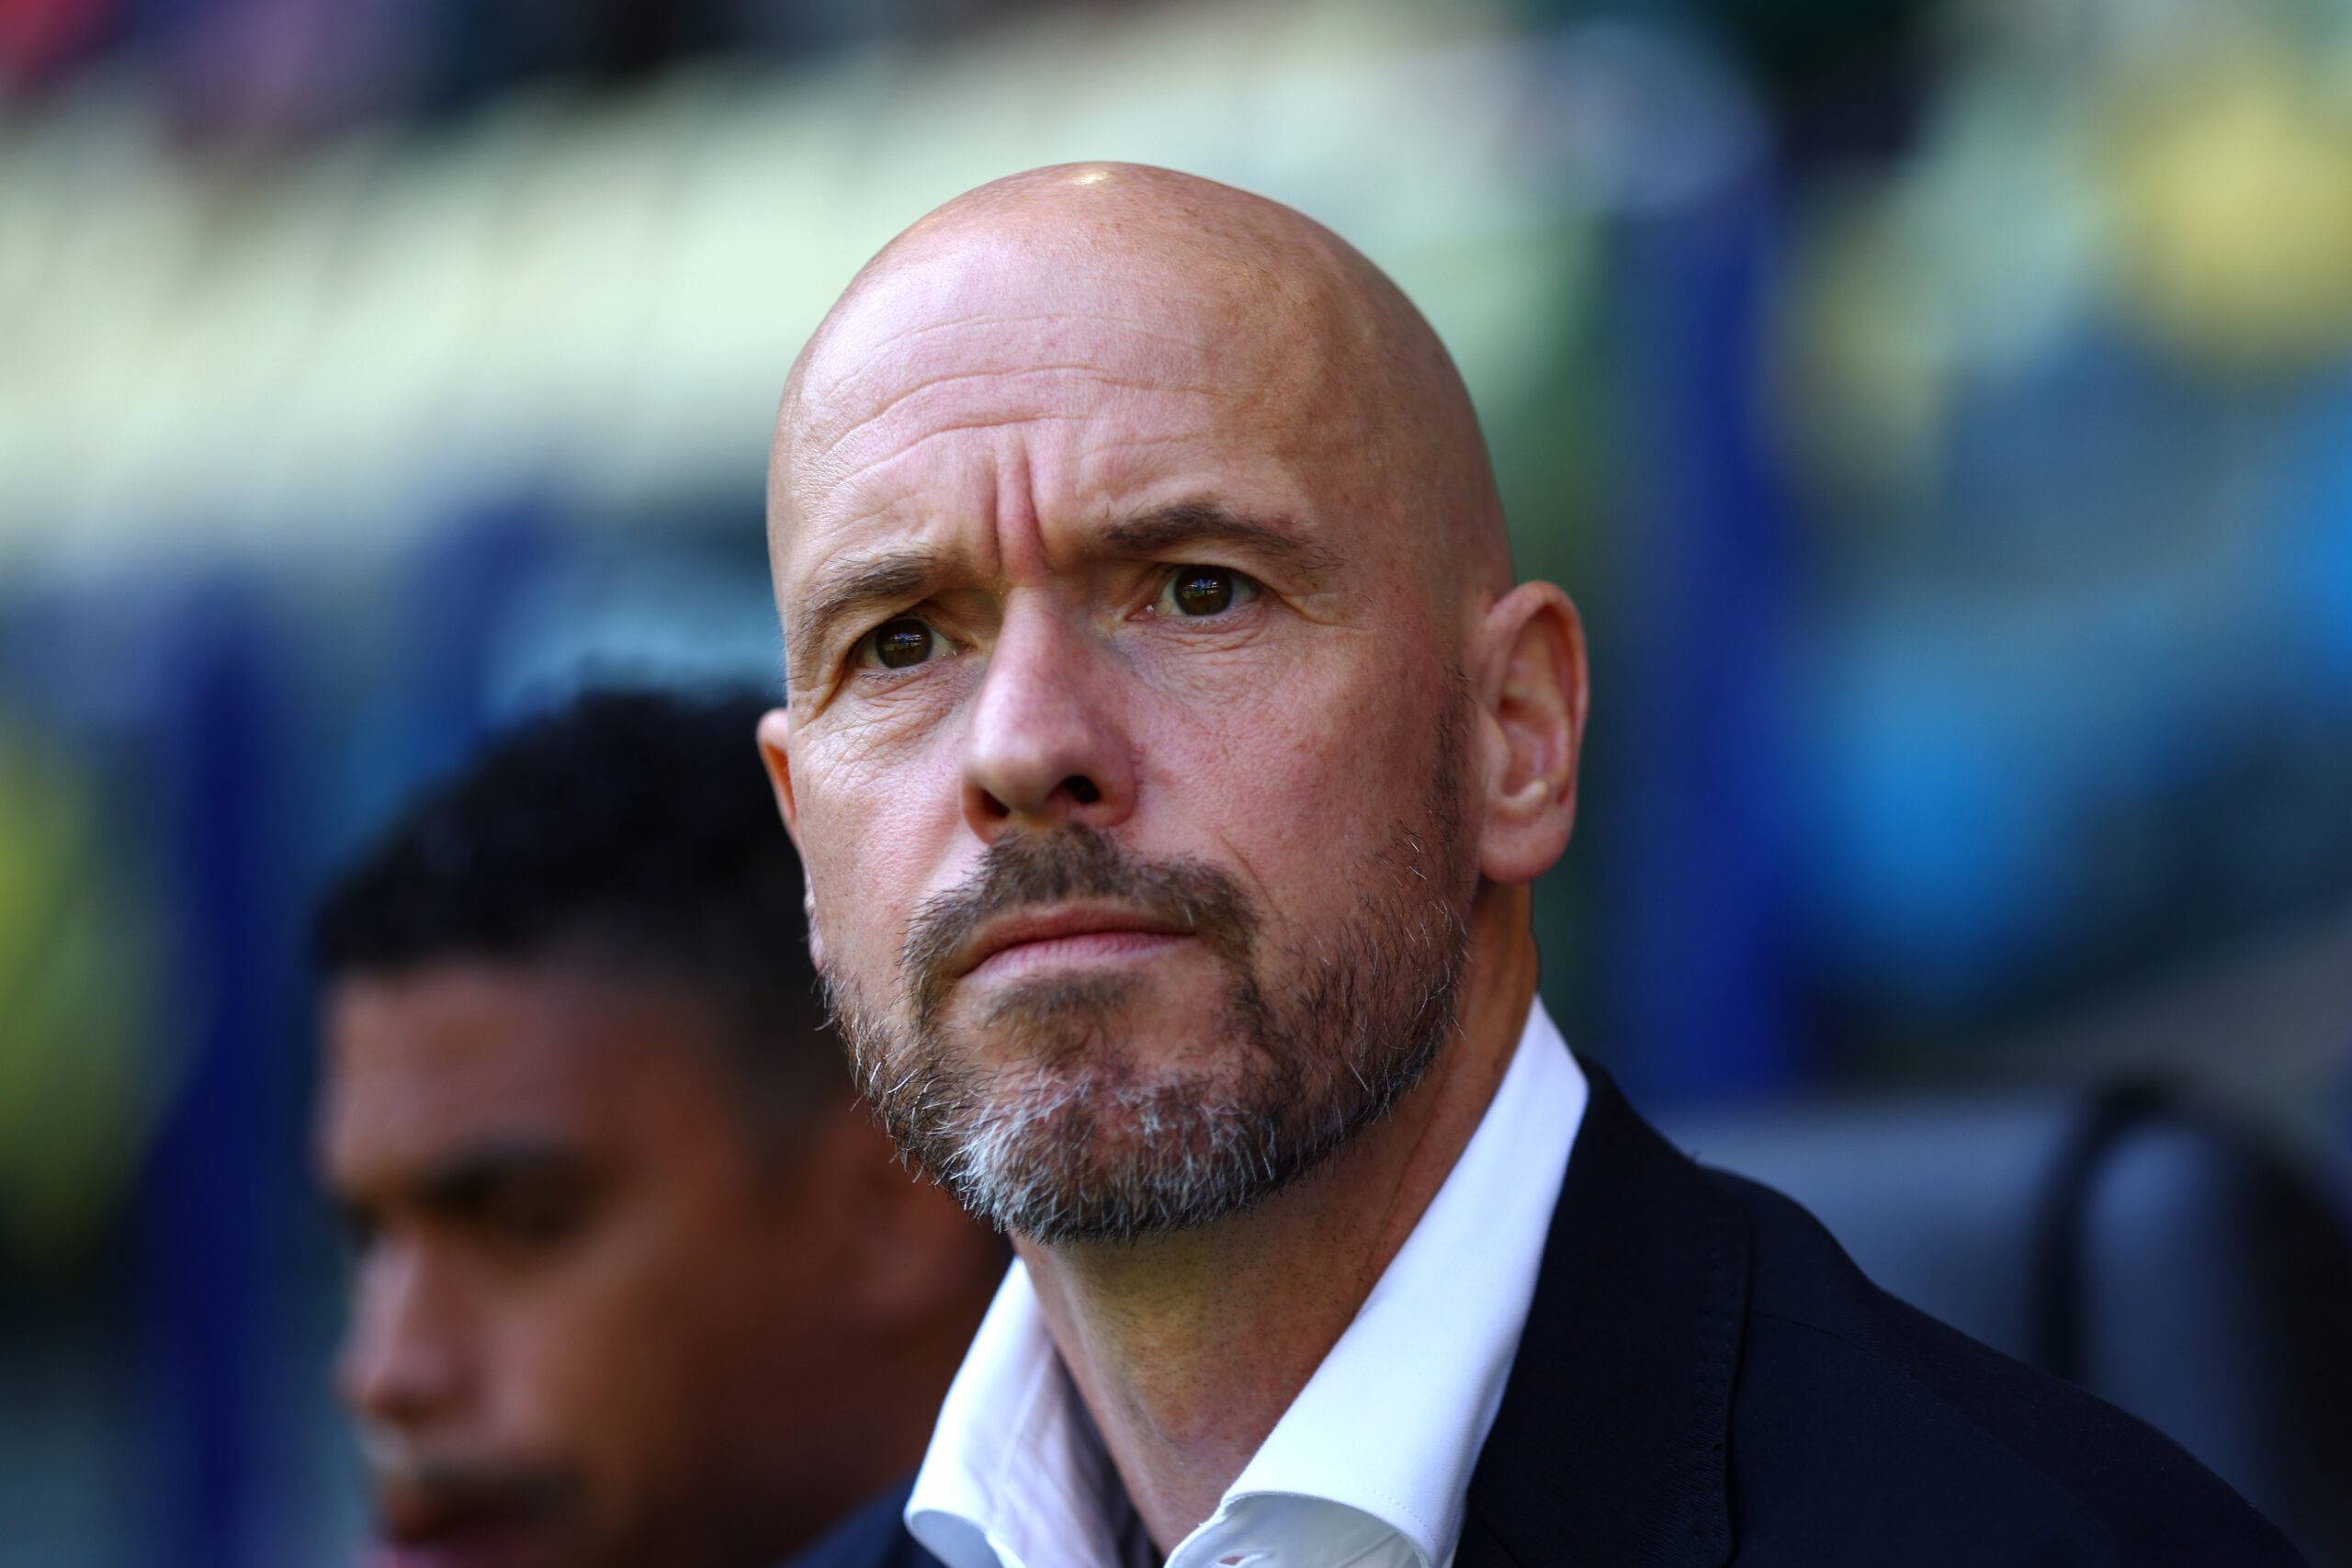 Manchester United manager Erik ten Hag watches on